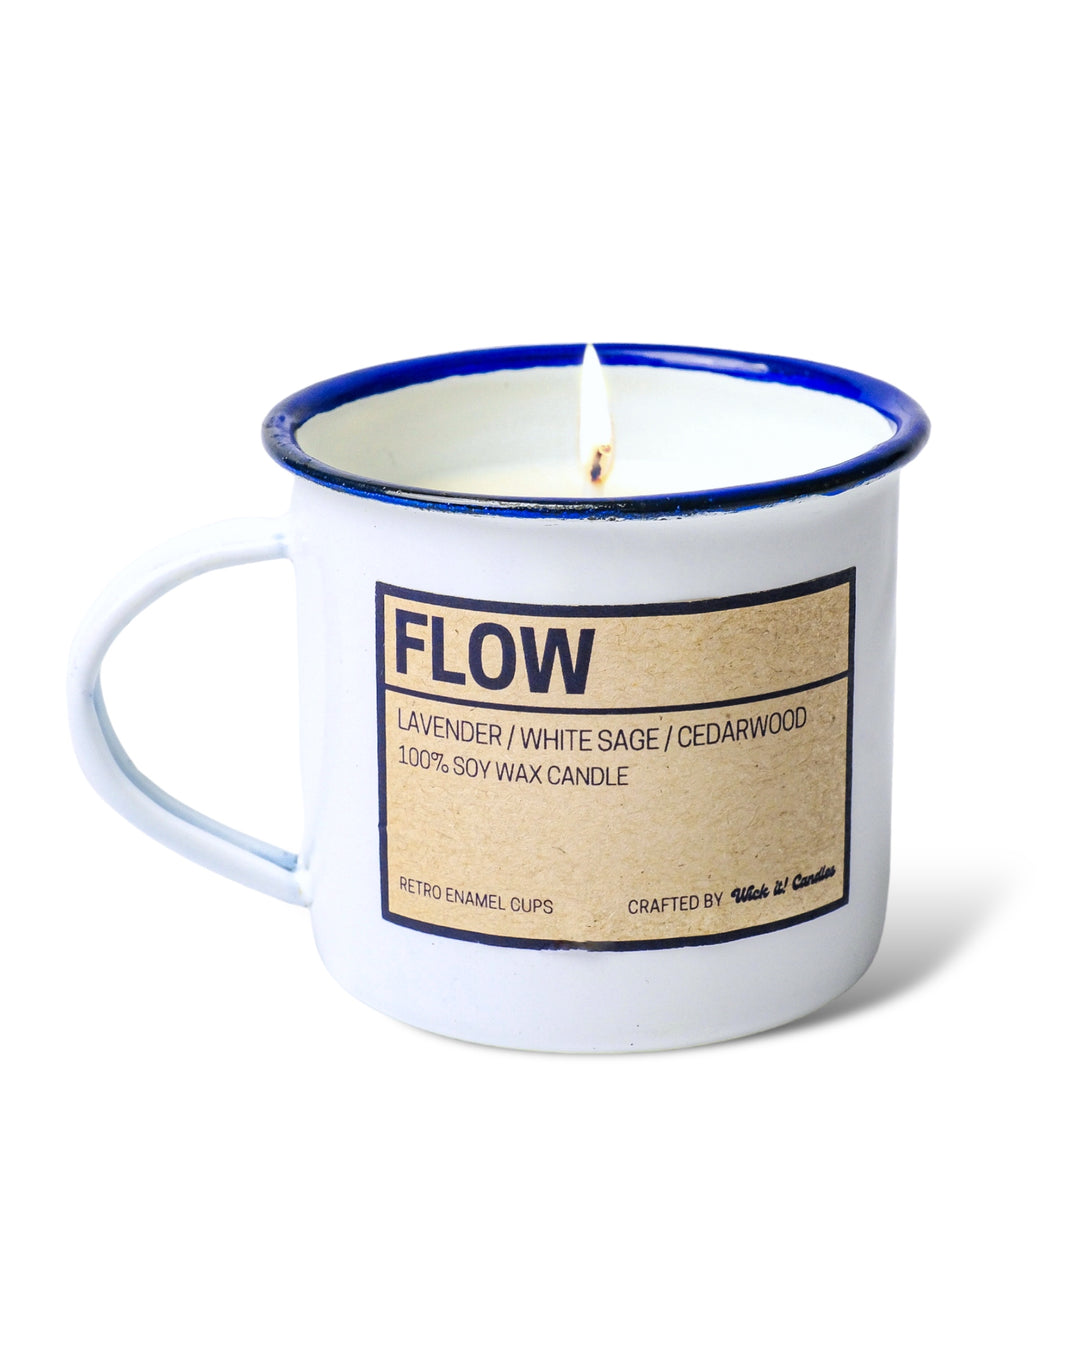 Wick It! Scented Flow (Lavender/White Sage/Cedarwood) Scented Candle